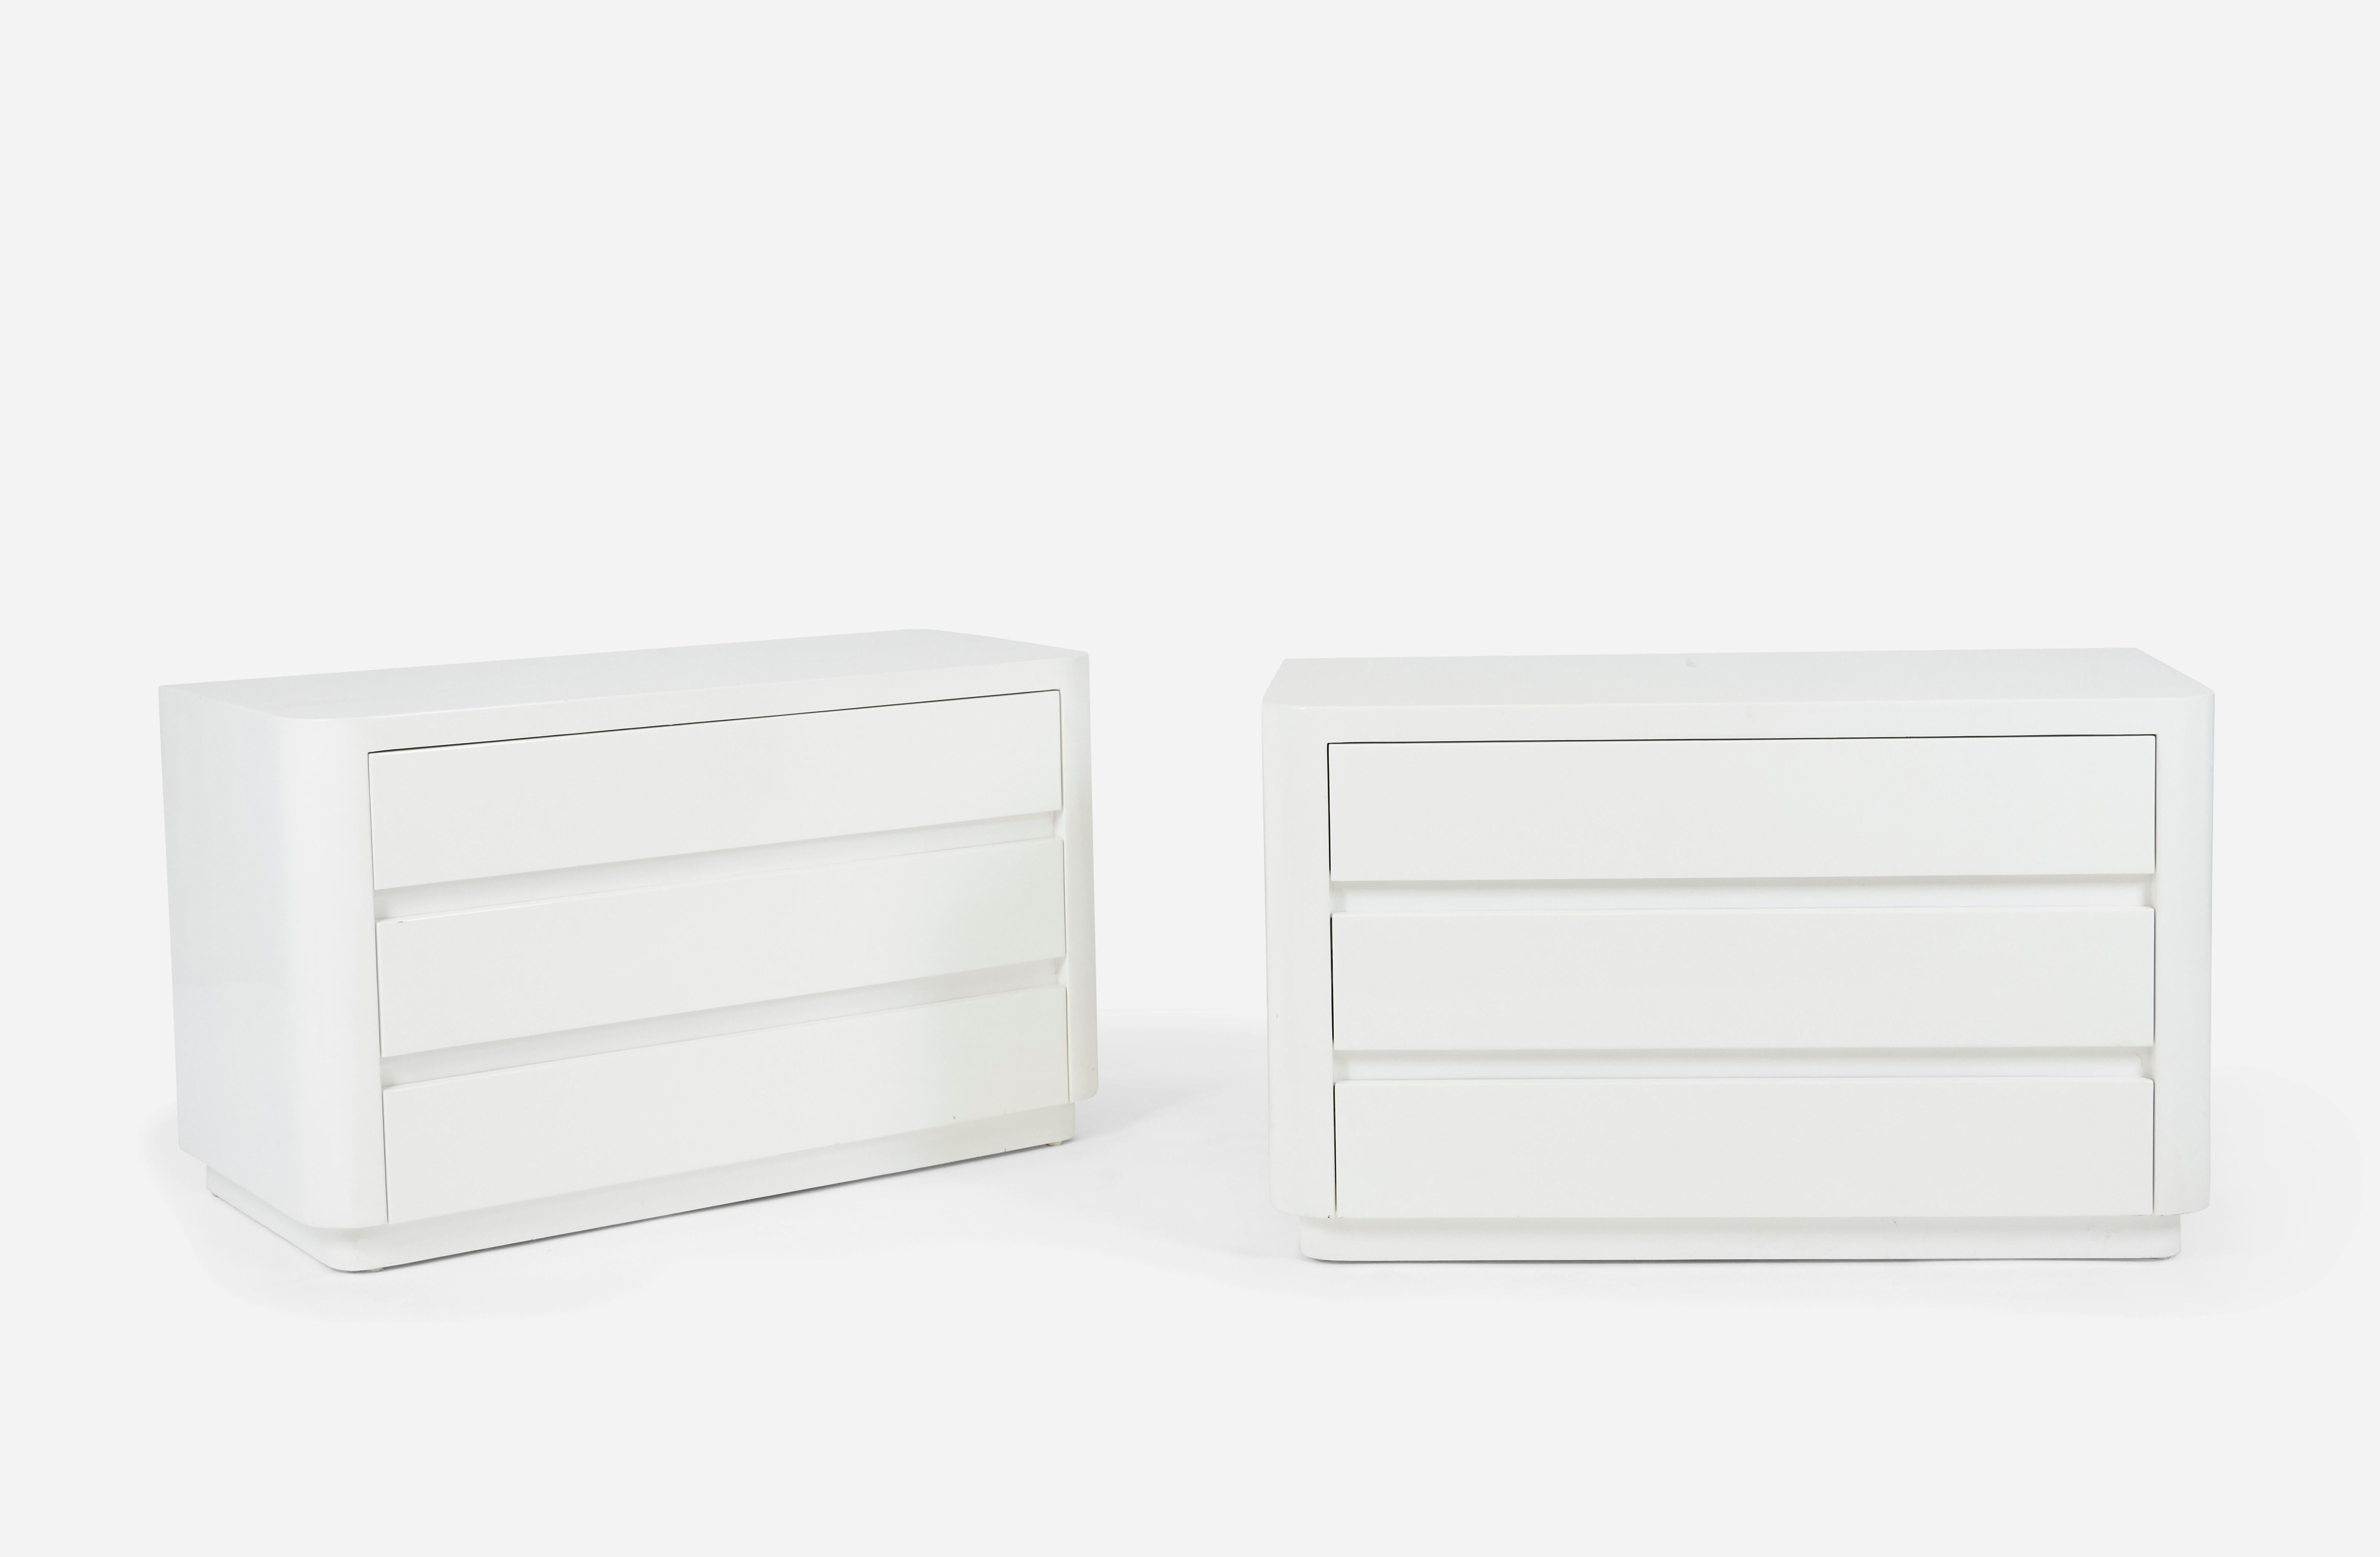 Pair of chests or large scale night stands by Karl Springer wrapped in goatskin. Each nightstand has 3 drawers. Beautiful bright white lacquer finish.